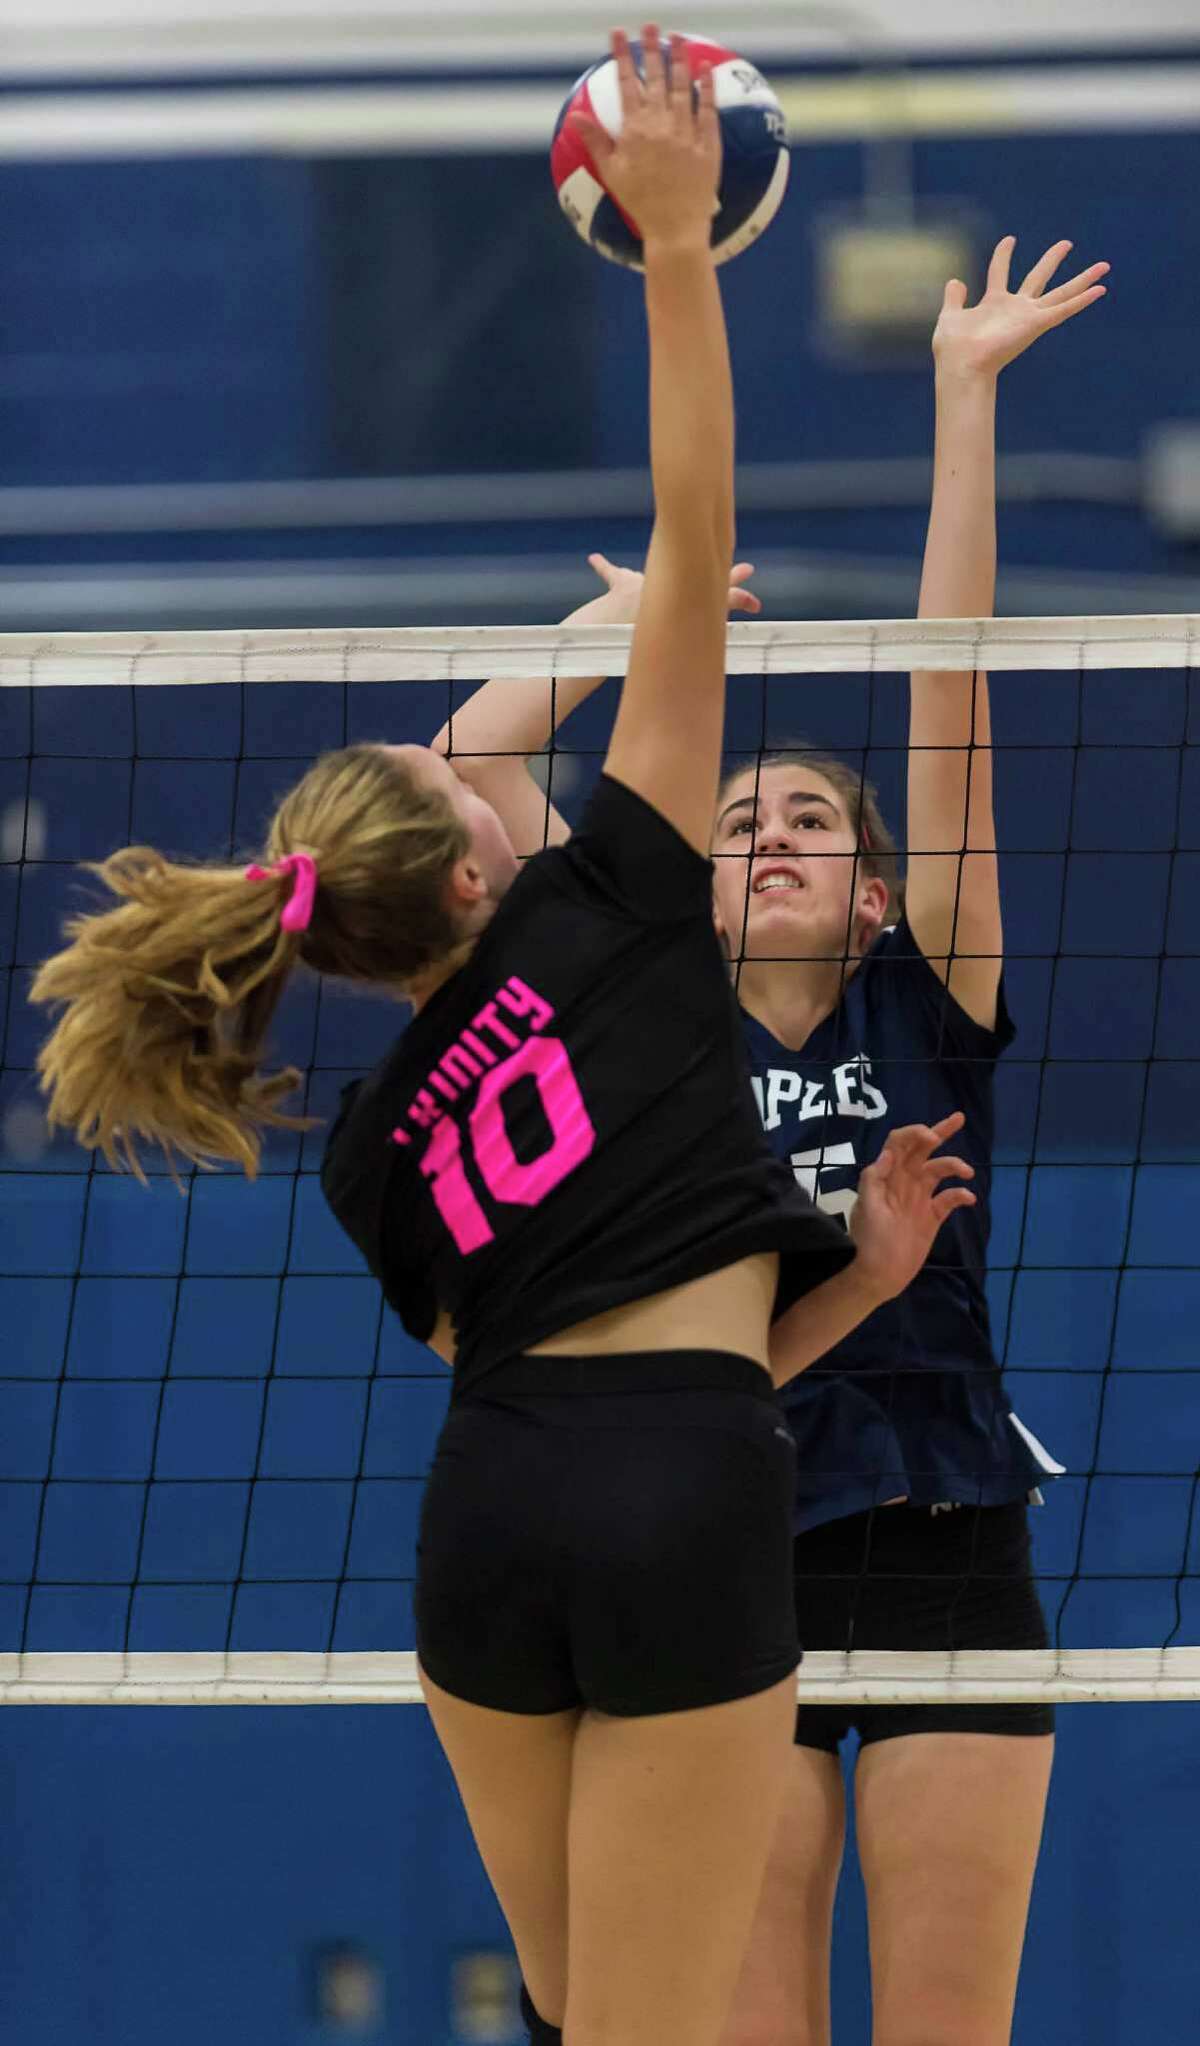 Staples High Schools Virginia Gerig goes up to try and block a spike by Trinity Catholic High Schools Emily Ellis during a girls volleyball game played at Staples High School, Westport, CT on Wednesday, October 28, 2015.